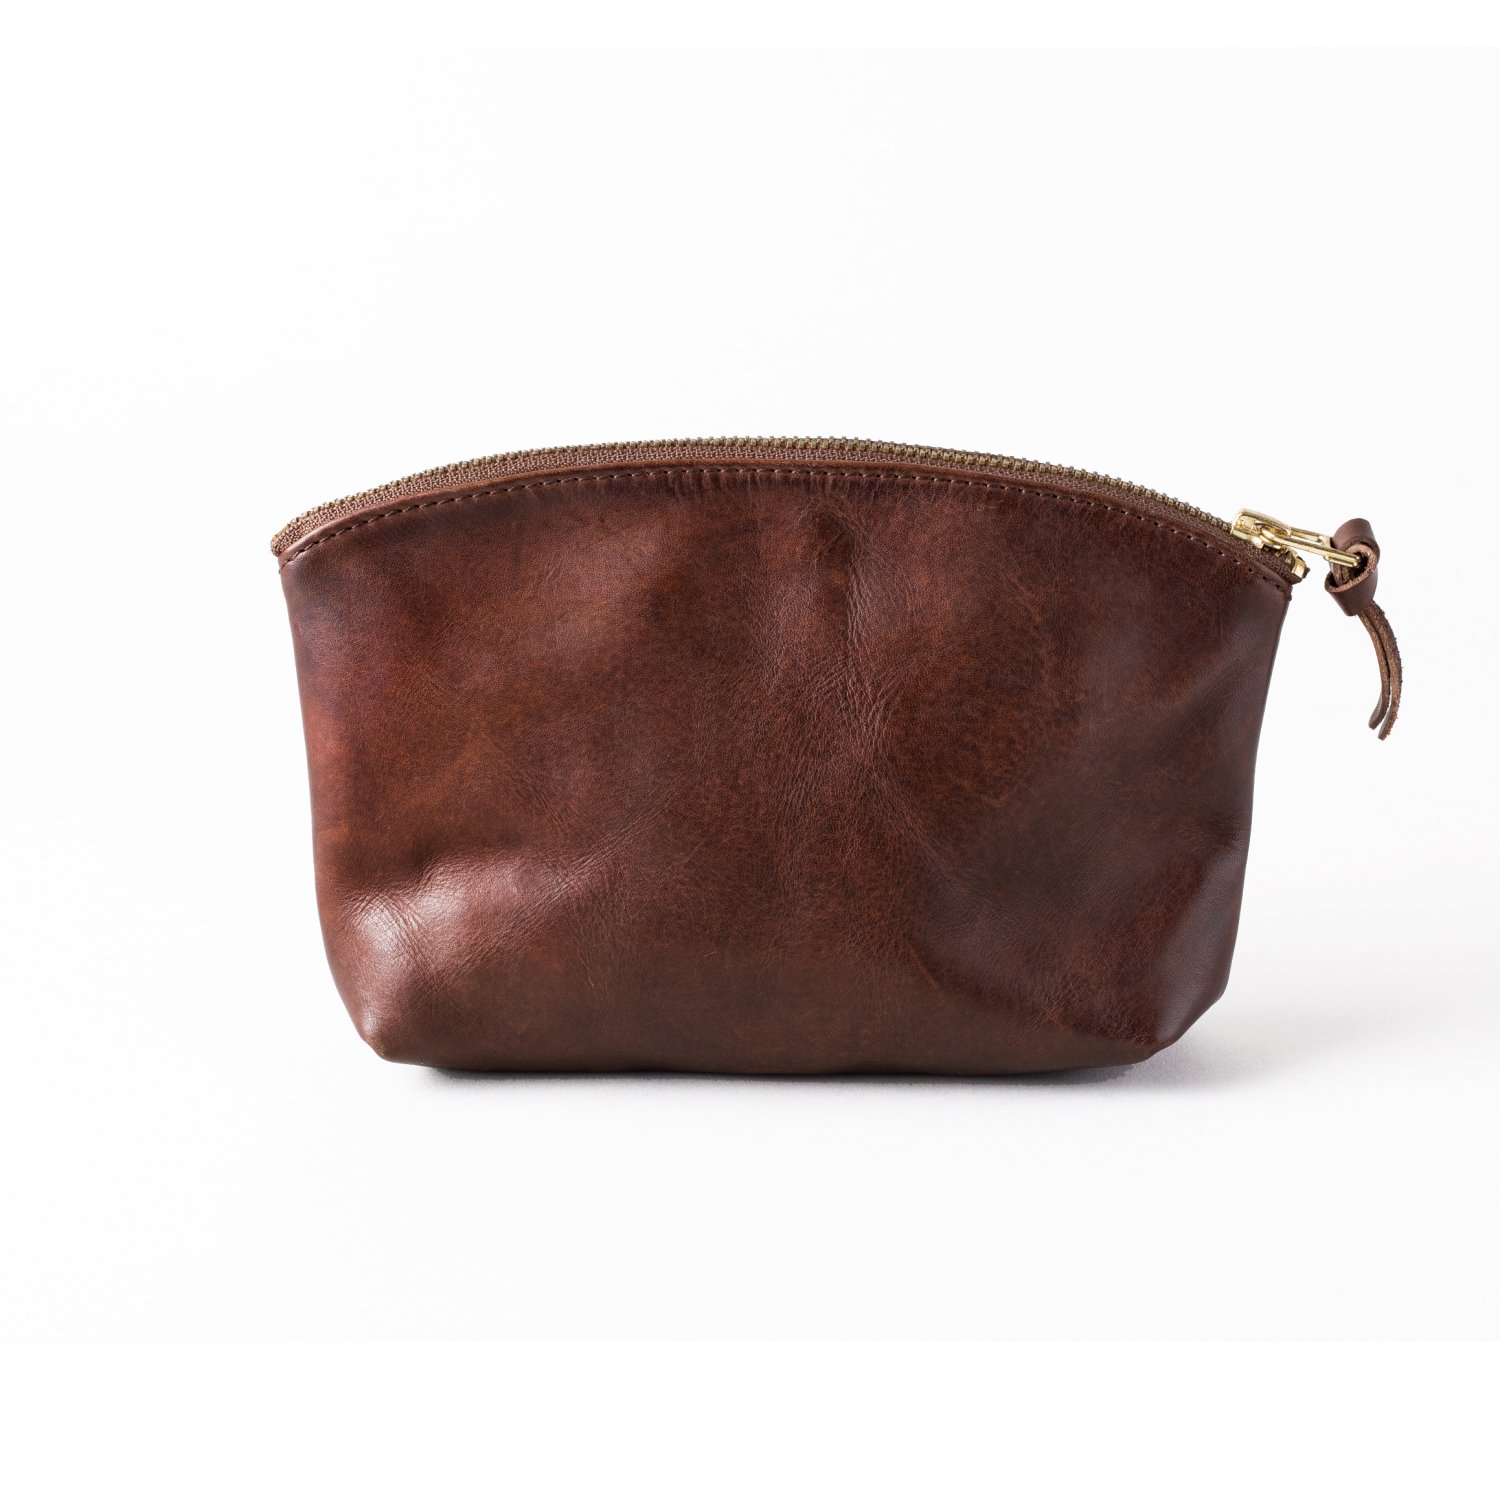 LEATHER TRAVEL POUCH - VASCO ONLINE STORE